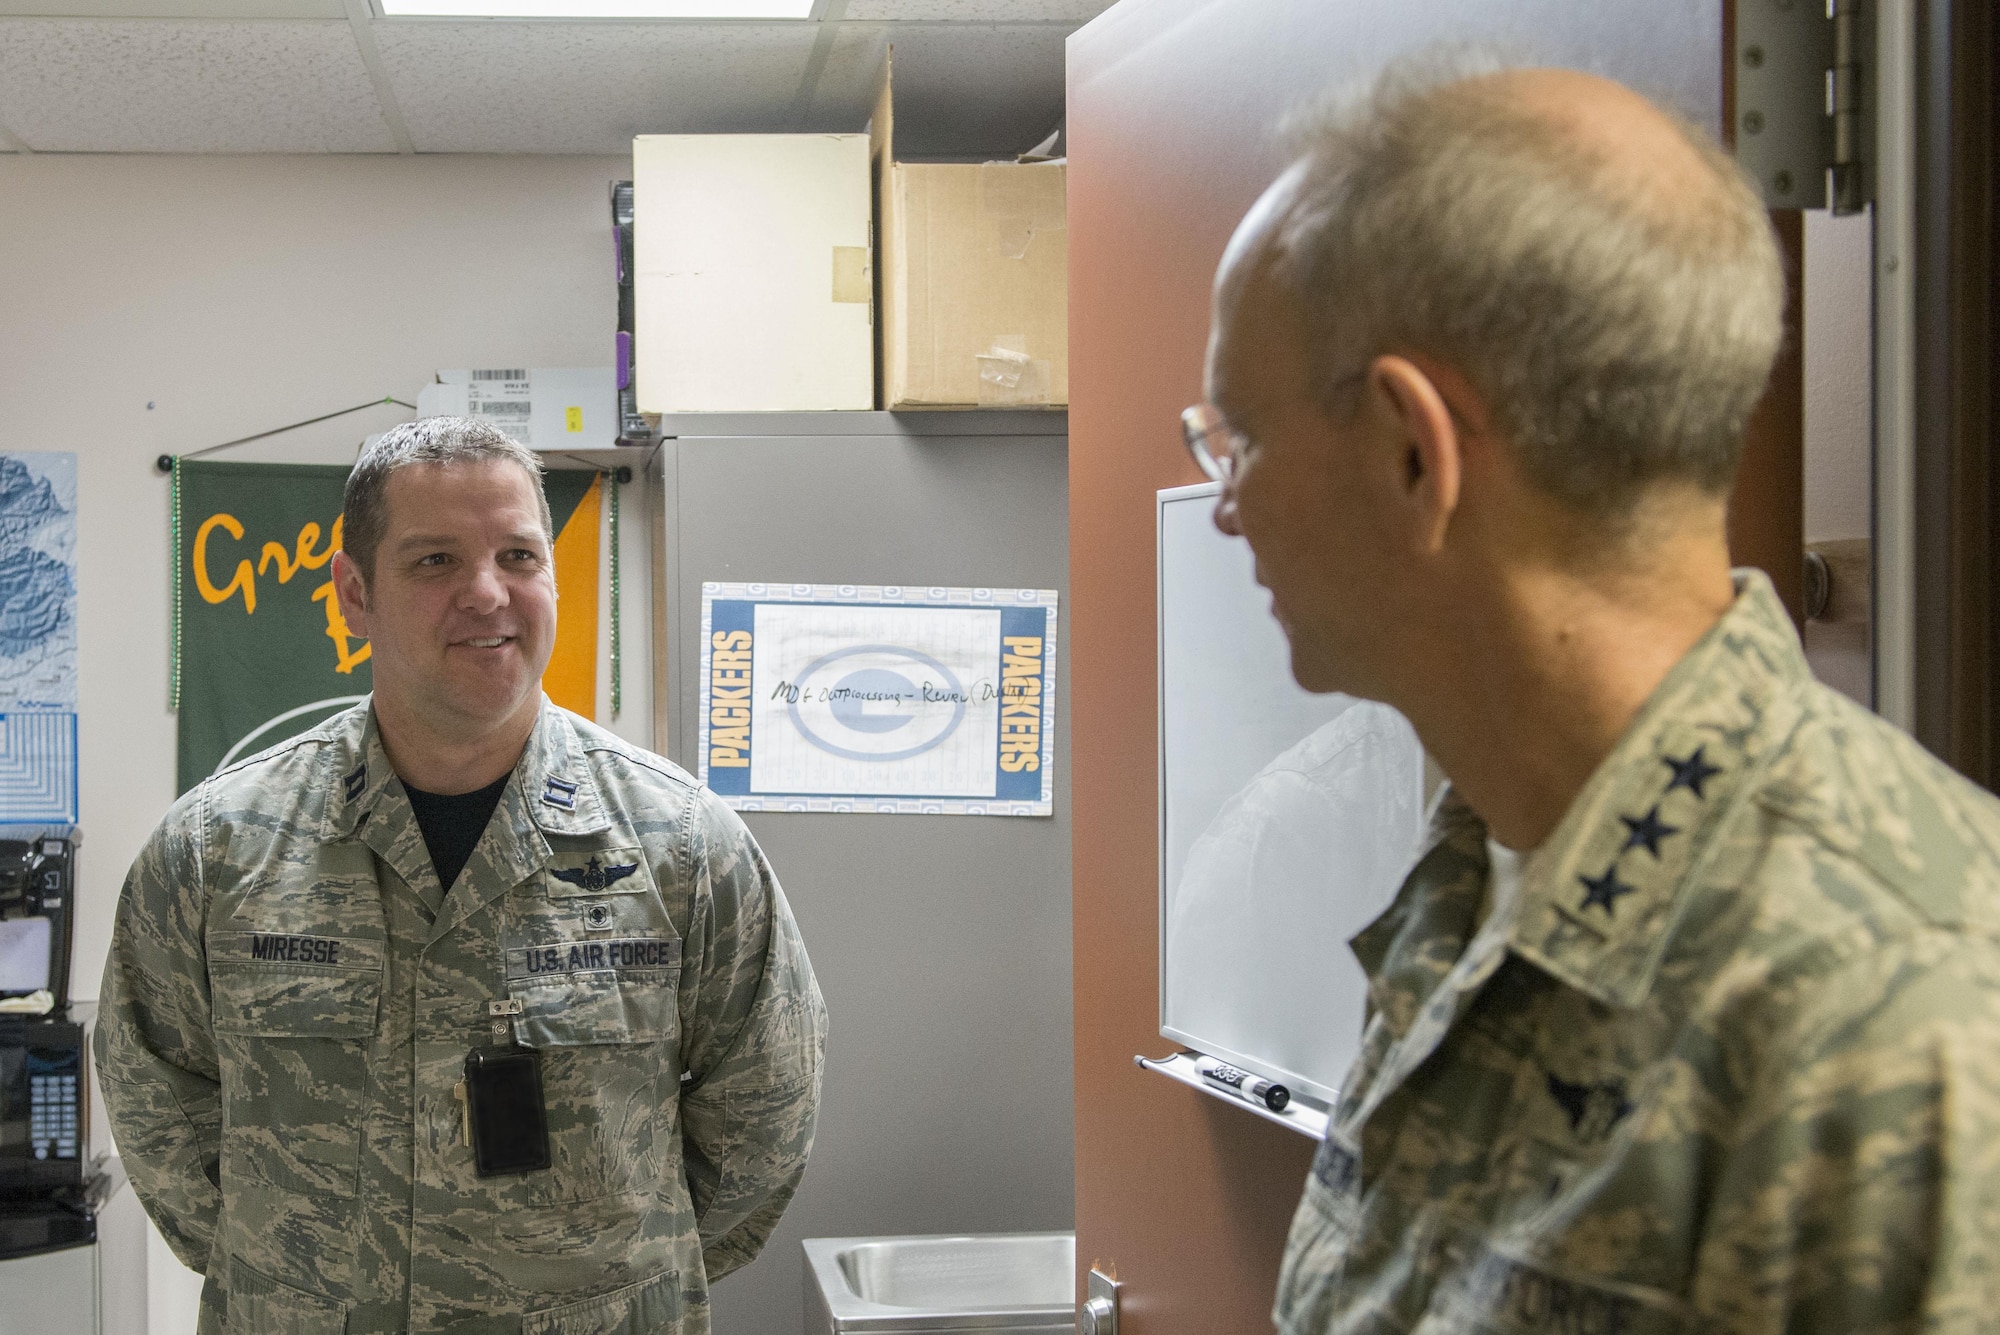 U.S. Air Force Lt. Gen. Mark Ediger, the Air Force surgeon general, speaks with Capt. Steven Miresse, a 354th Medical Group health care integrator, March 10, 2017 at Eielson Air Force Base, Alaska. Ediger entered the Air Force in 1985 and has served as the Aerospace Medicine Consultant to the Air Force surgeon general, commanded two medical groups and served as command surgeon for three major commands. (U.S. Air Force photo by Airman Eric M. Fisher)